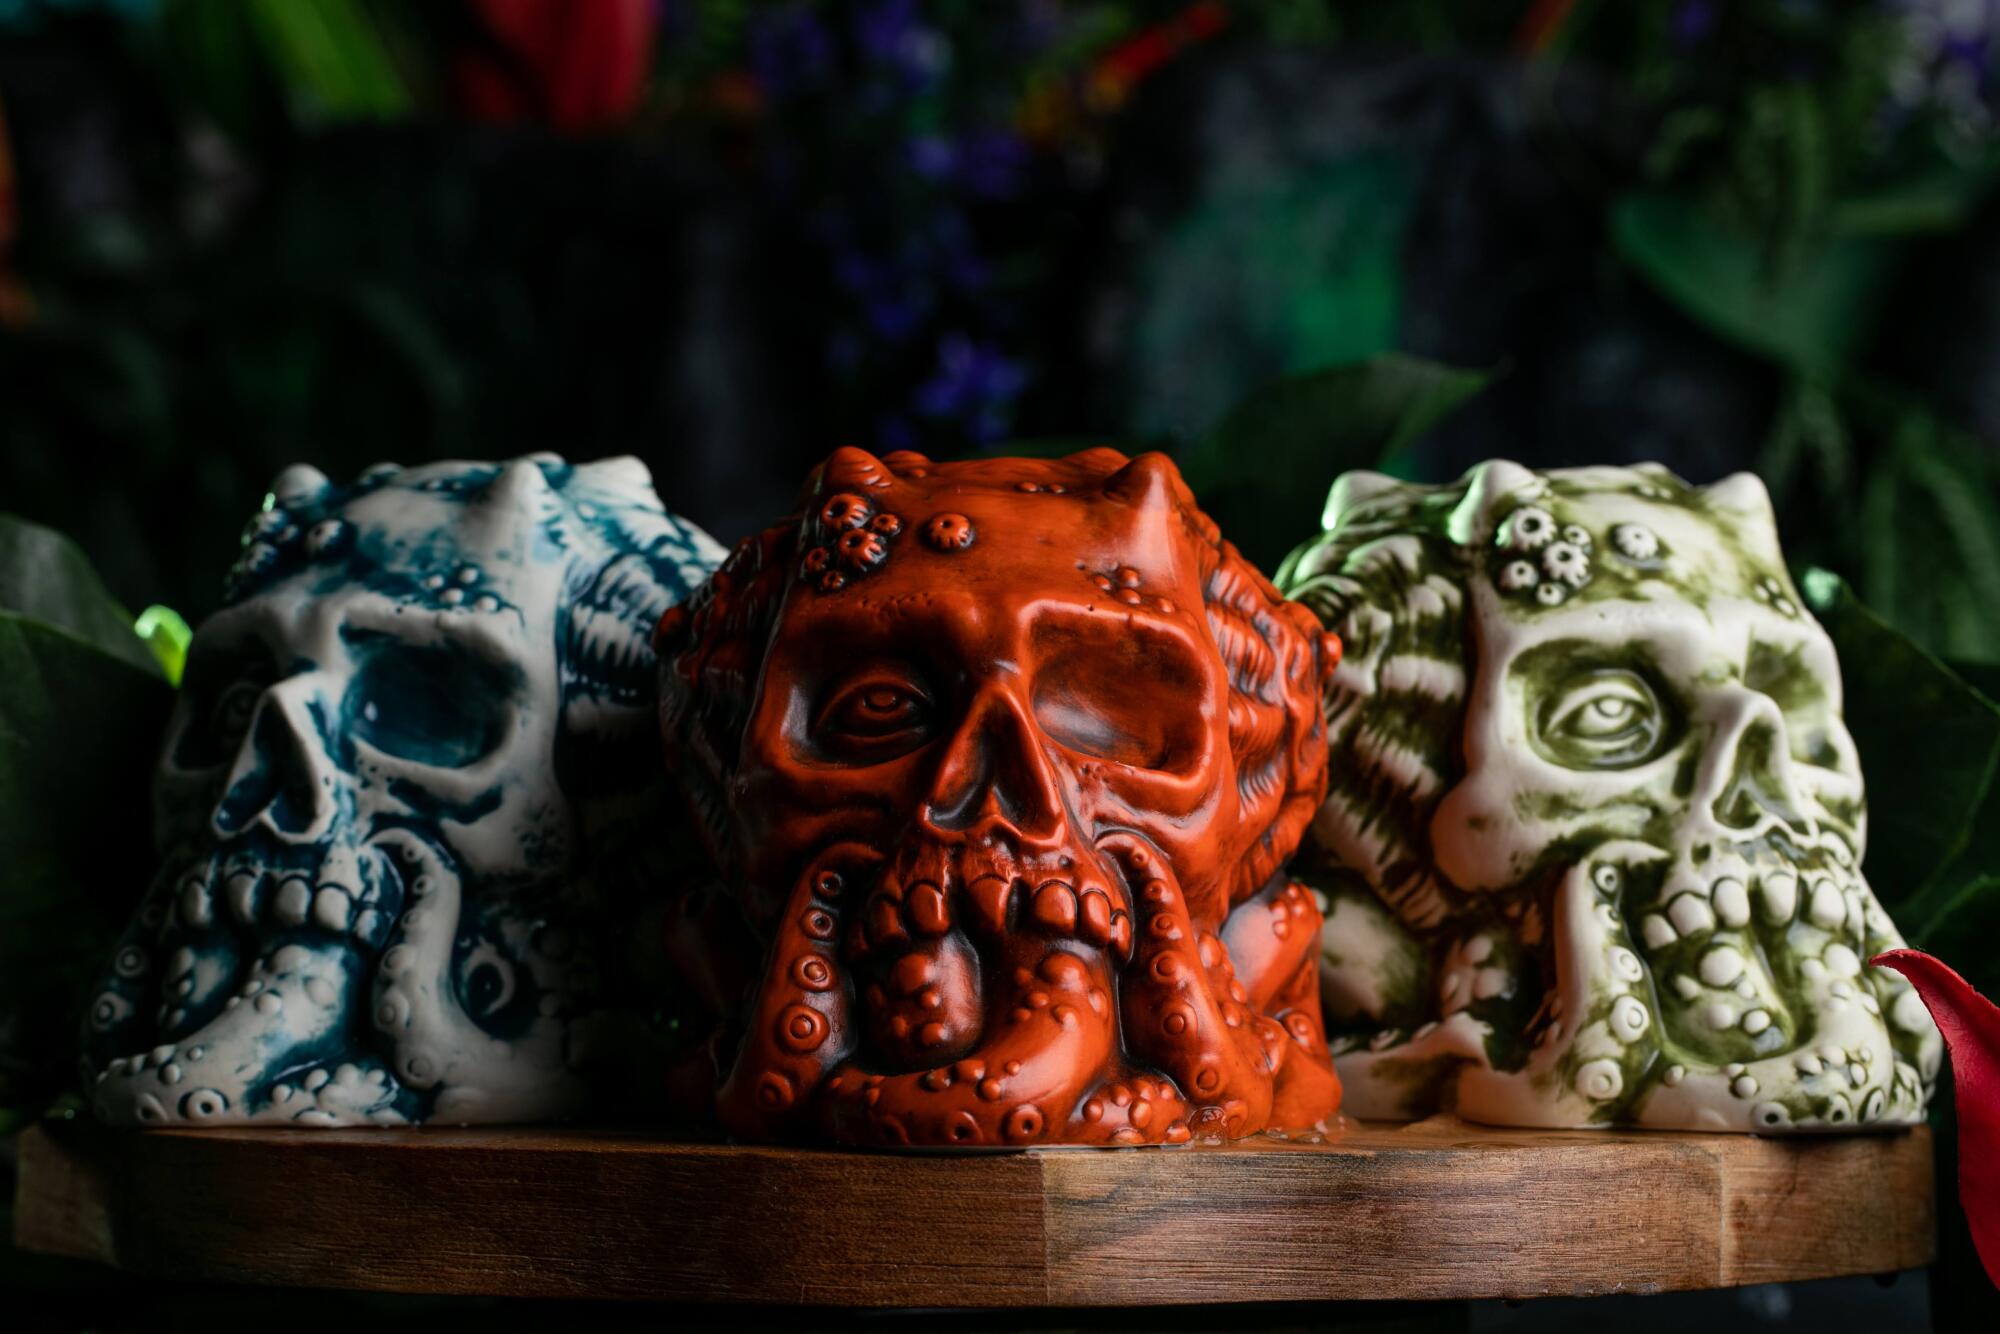 Strong Water Anaheim displays nods to tiki culture and custom mugs.